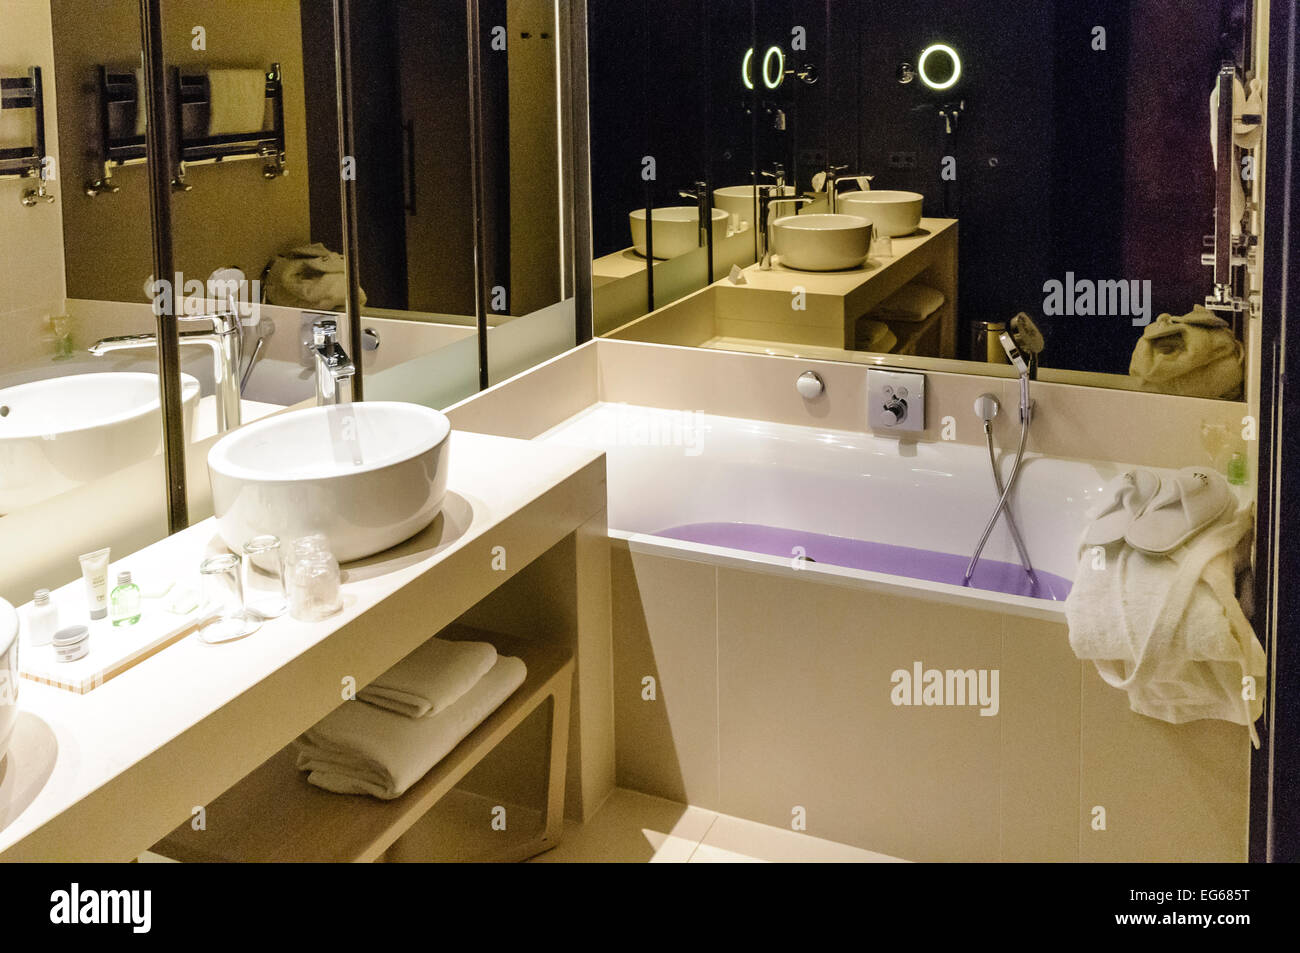 Bathroom in one of the newly renovated suites in the NH Grand Hotel Krasnapolski, Amsterdam Stock Photo